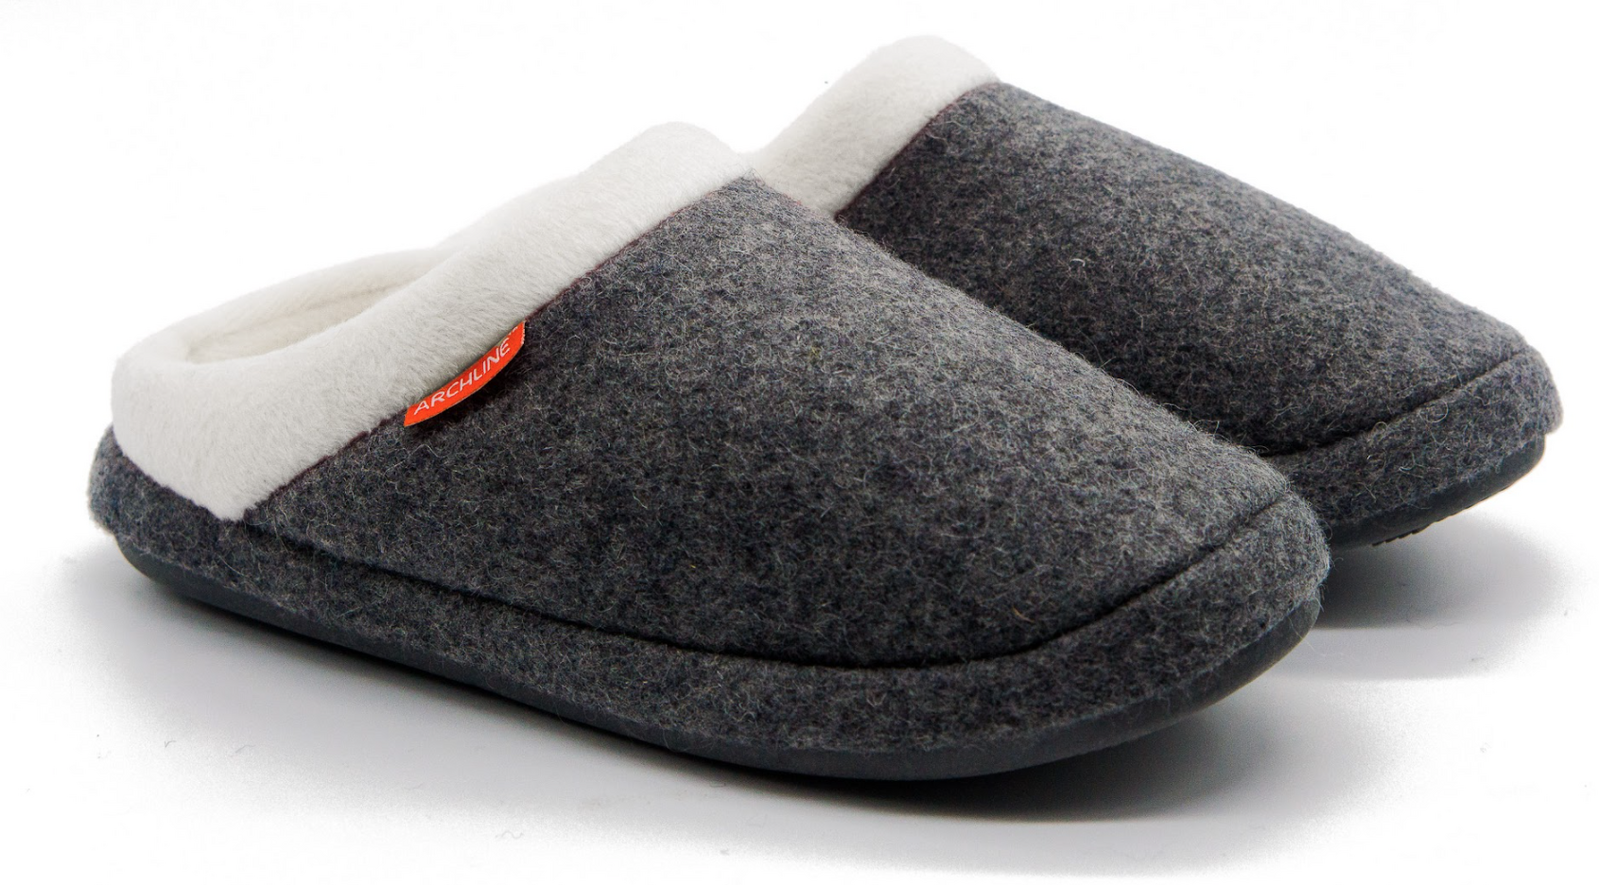 Orthotic Slippers Slip On Arch Scuffs Orthopedic Moccasins - Grey Marle - EUR 36